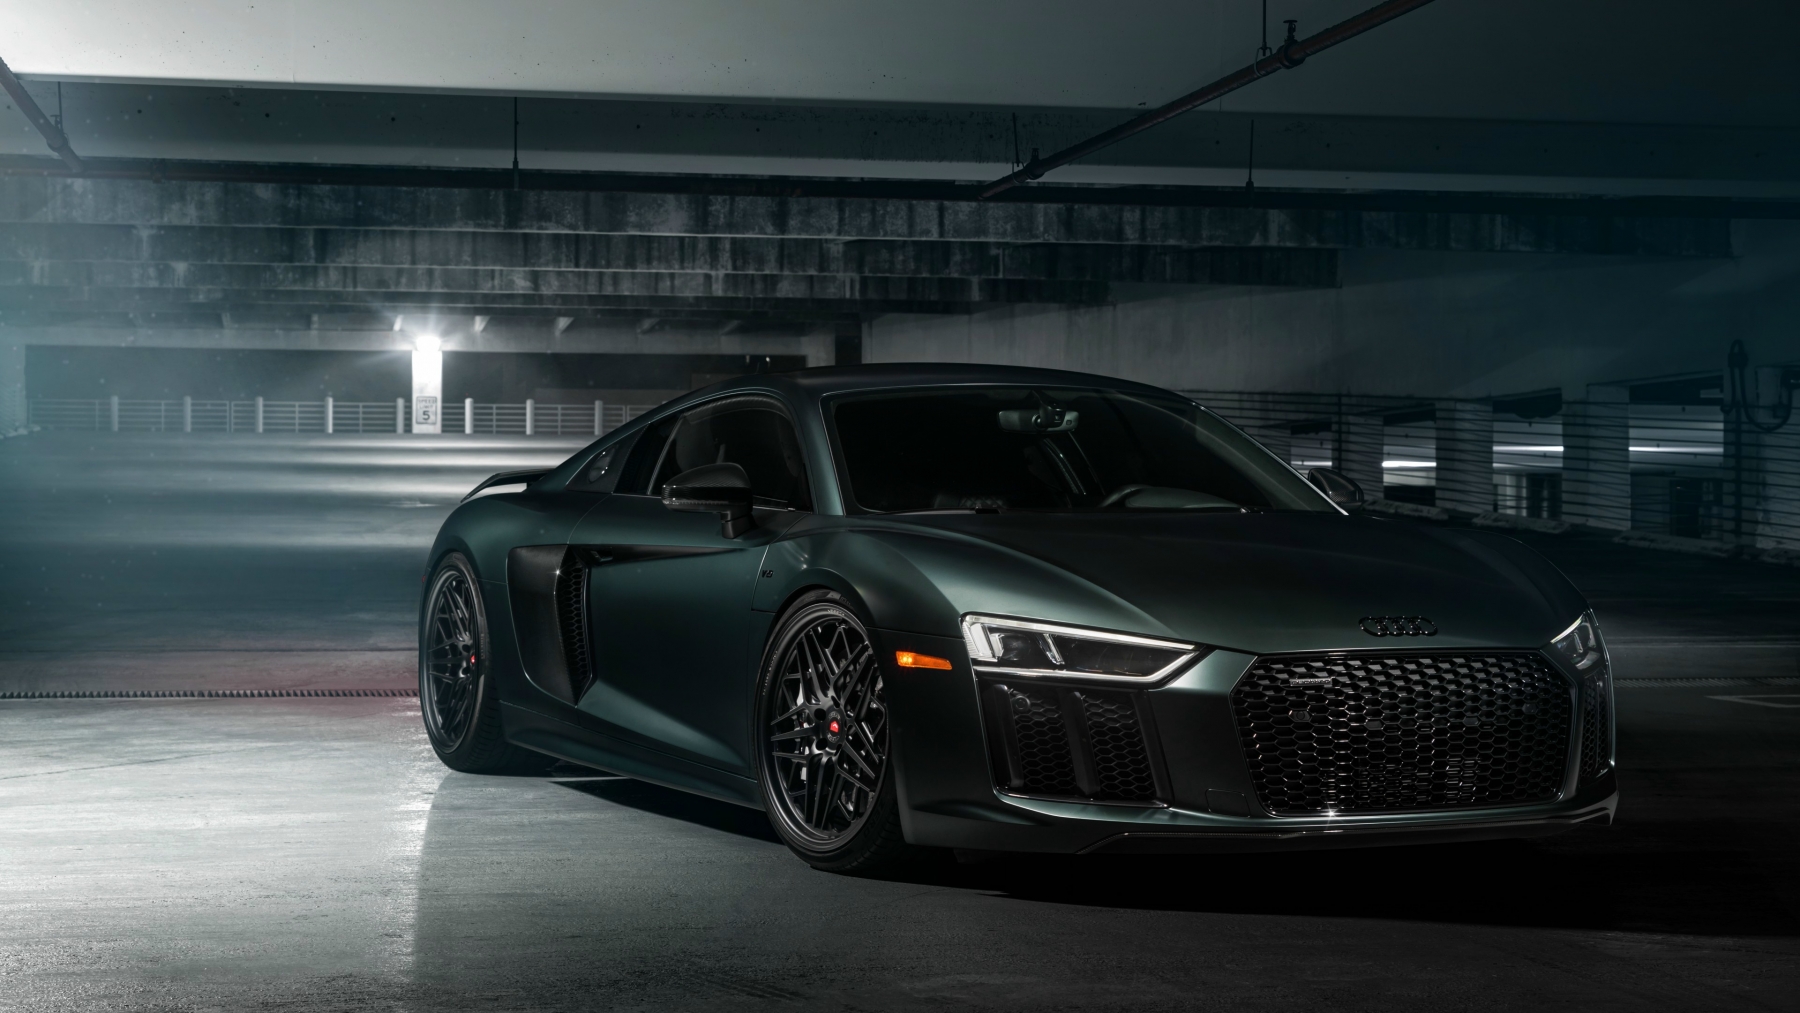 Audi R8 HD Wallpaper Background Image Photos Pictures